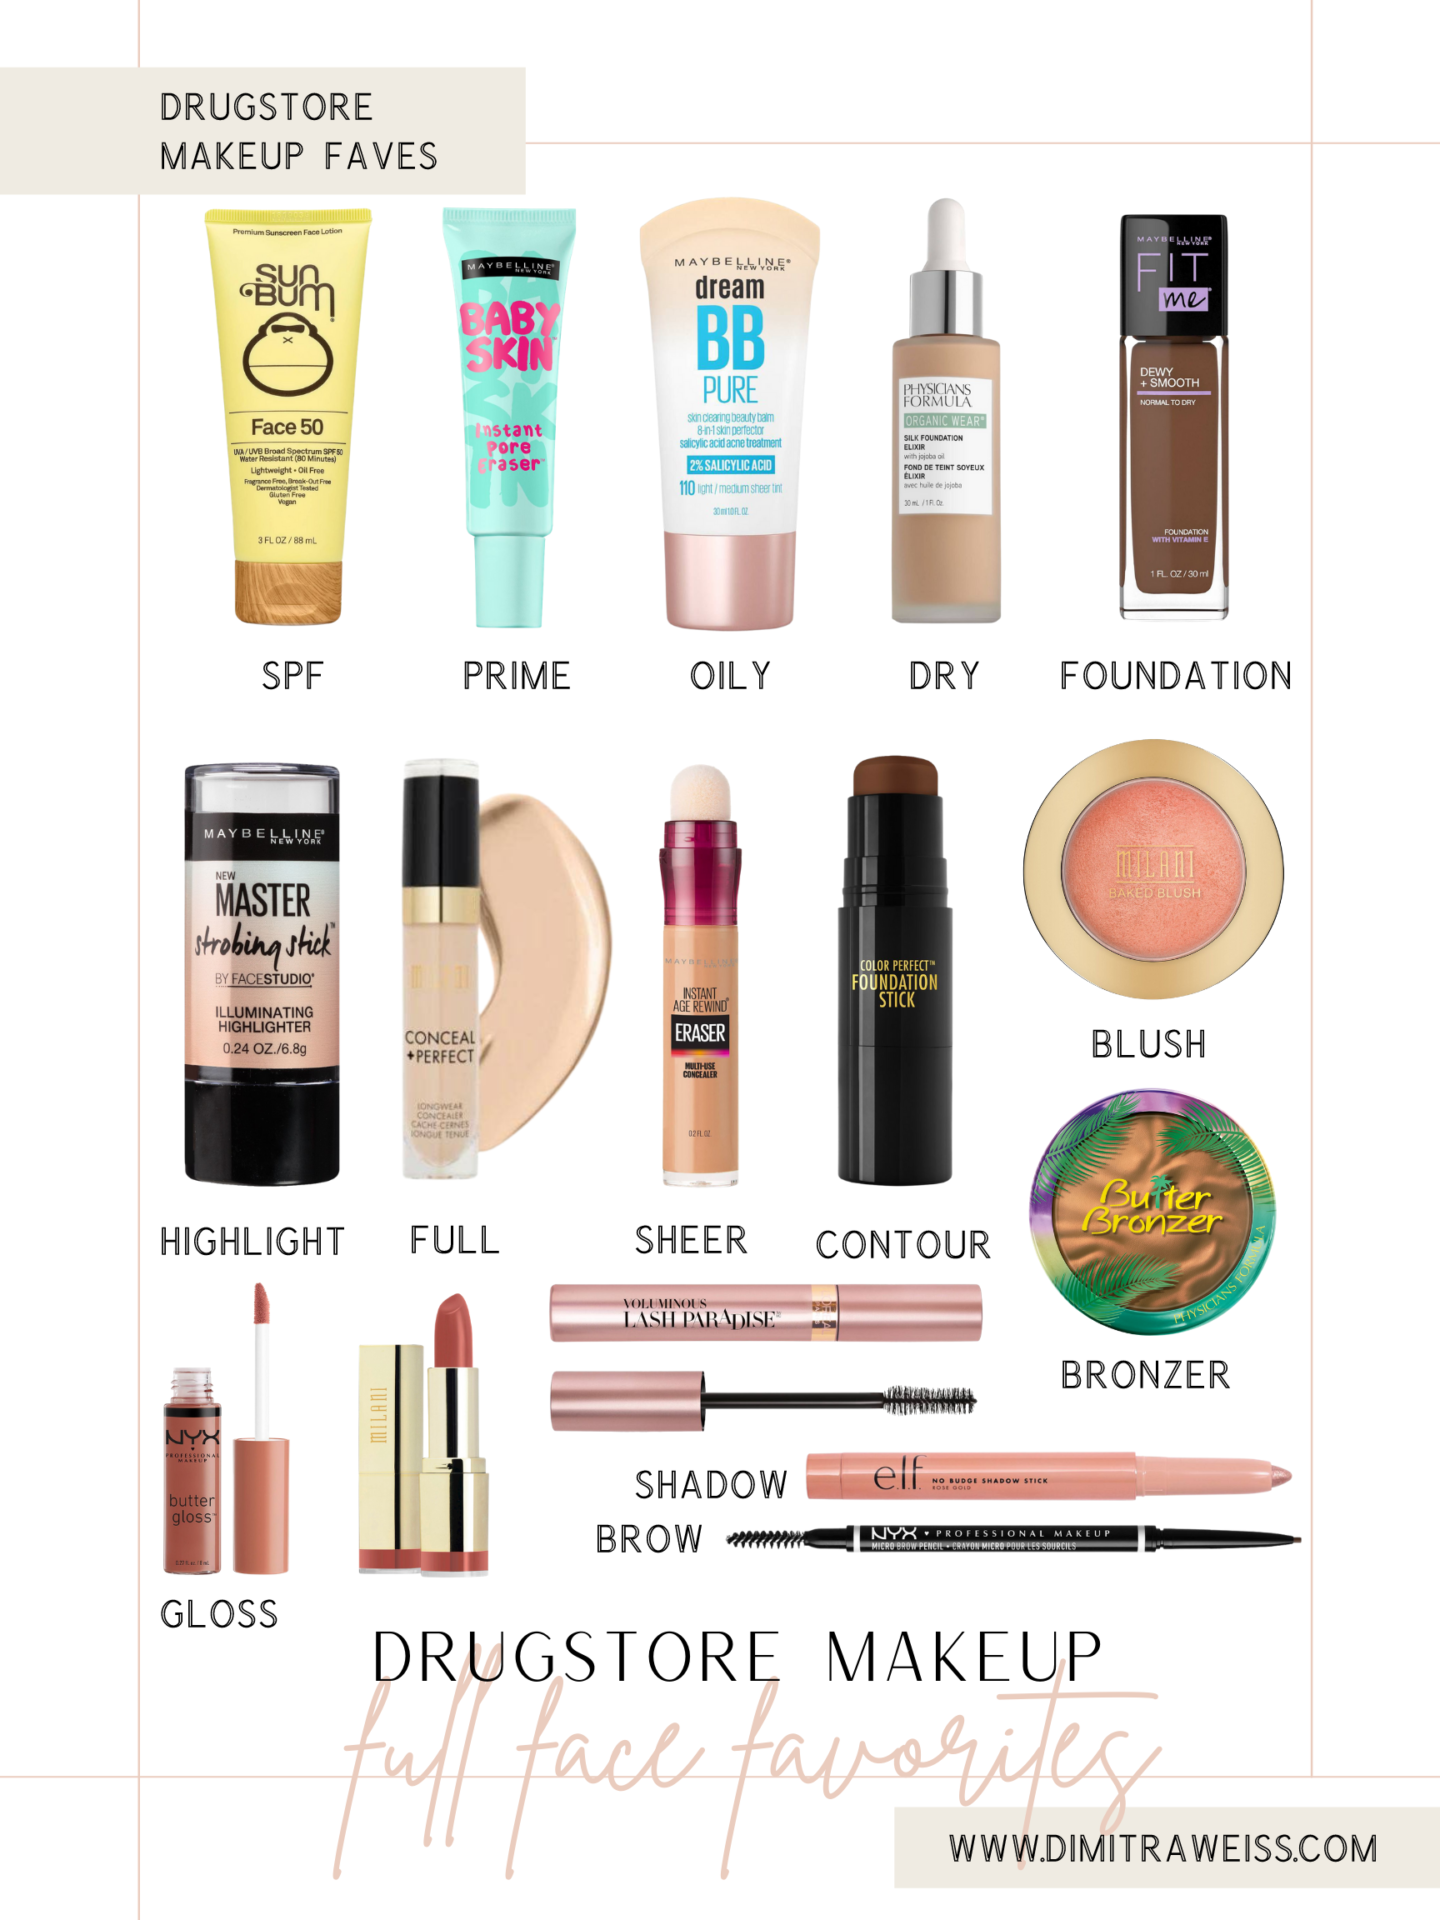 Full of Drugstore Makeup Must-Haves - Dimitra Weiss